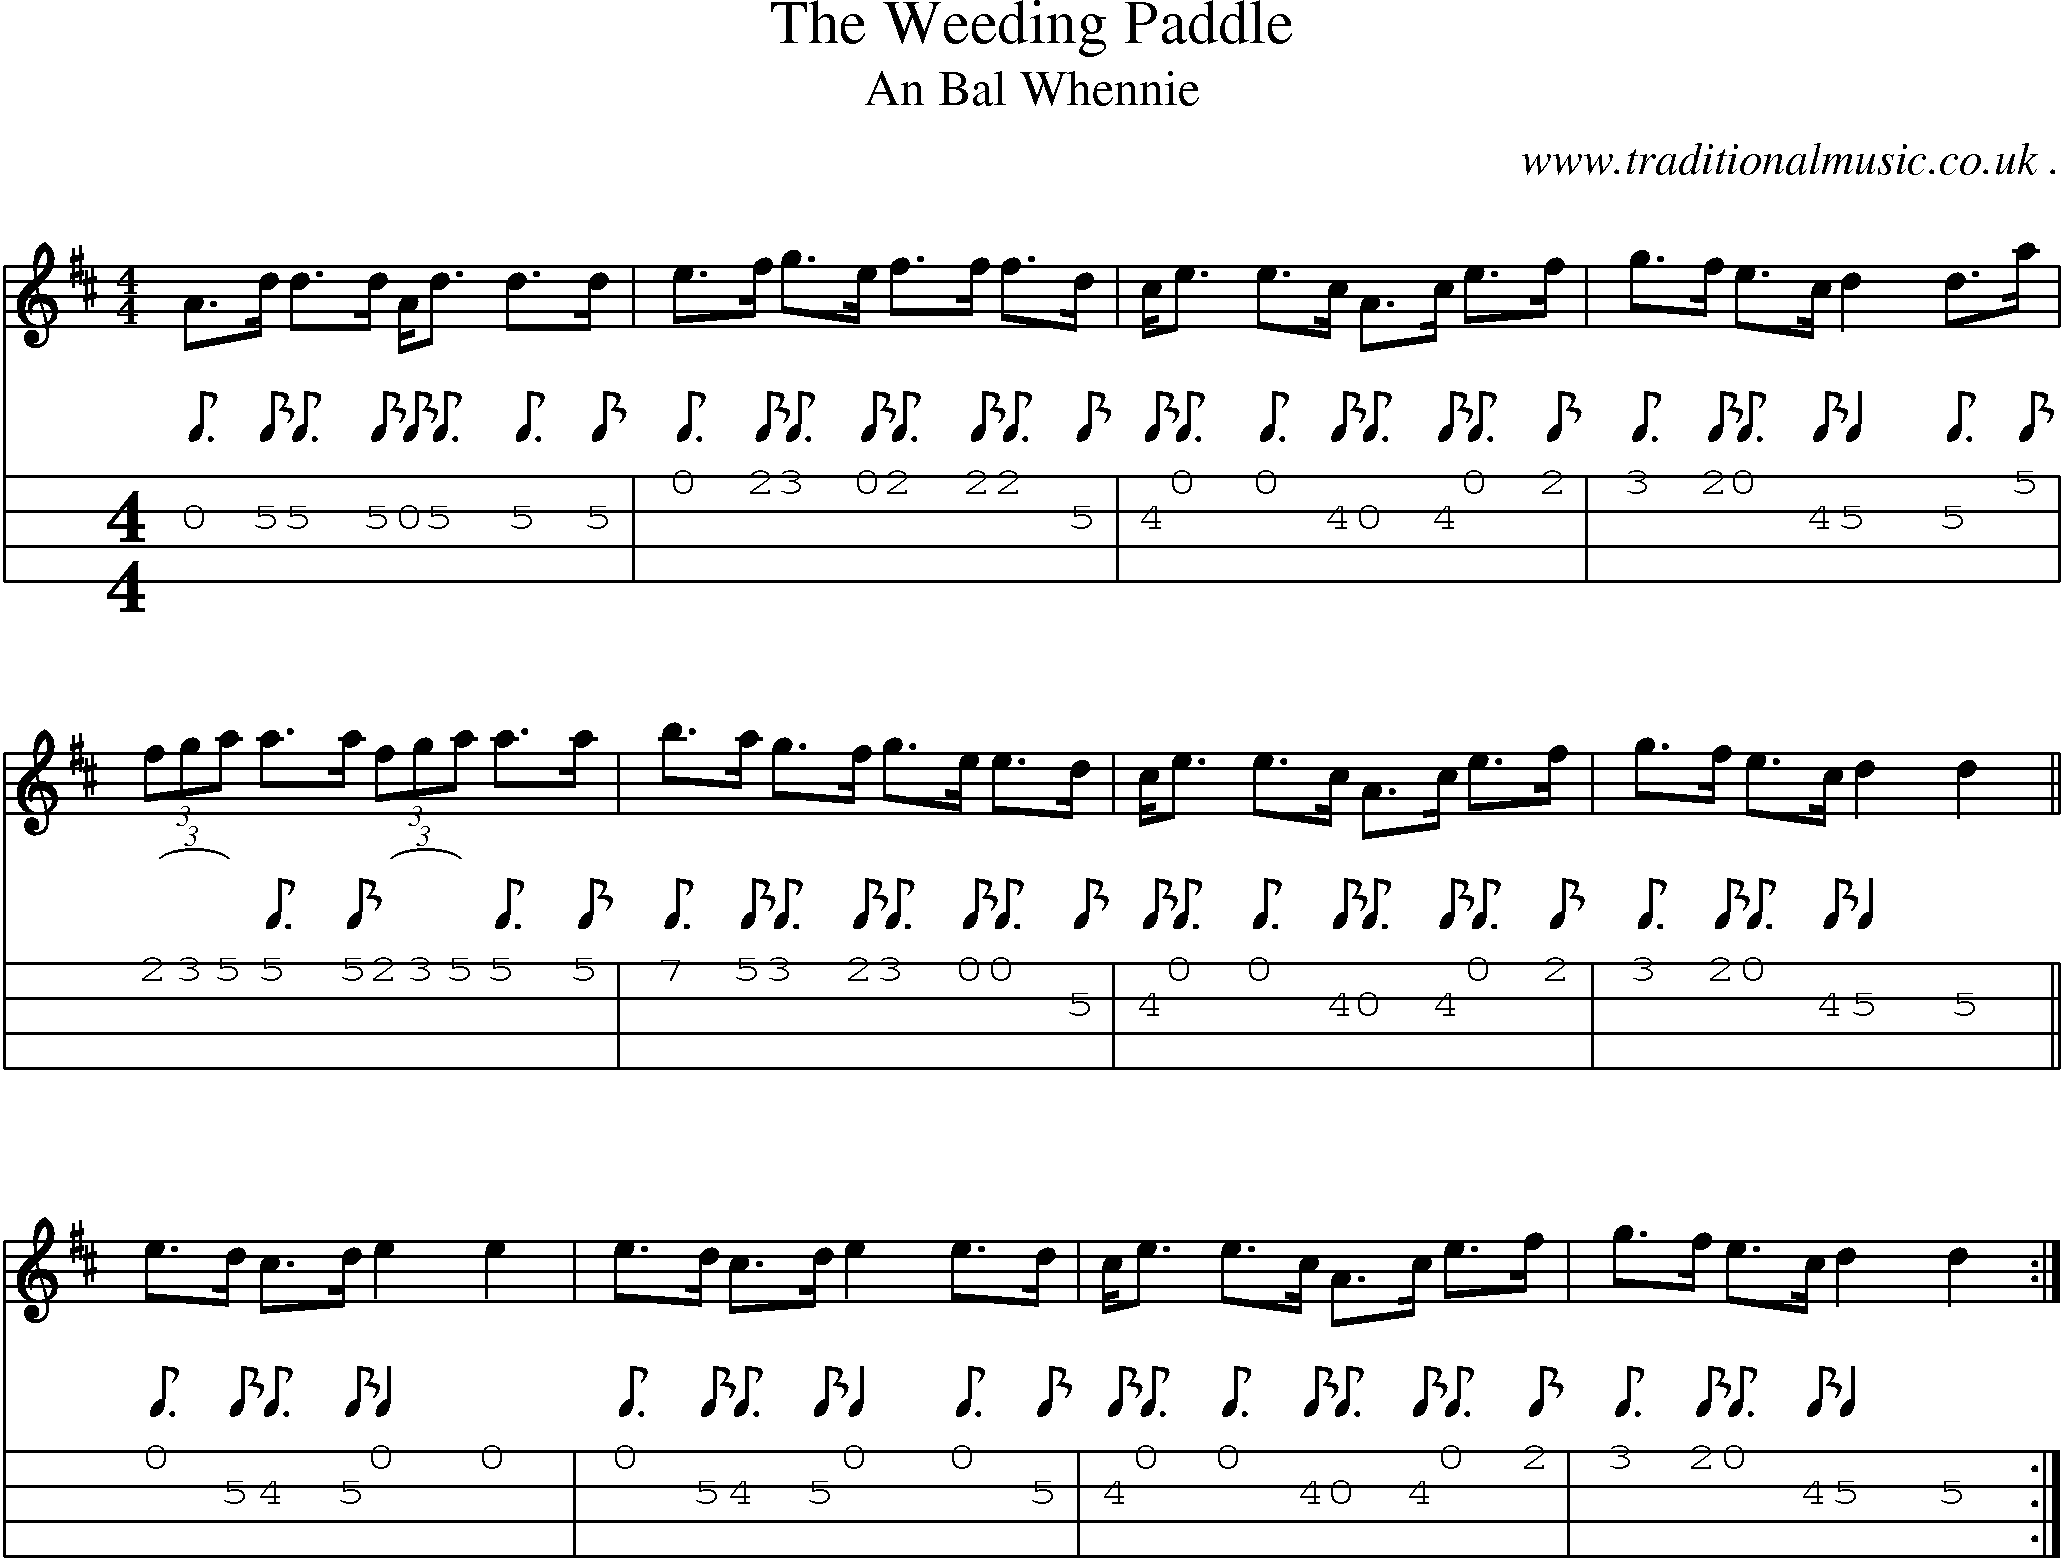 Sheet-Music and Mandolin Tabs for The Weeding Paddle